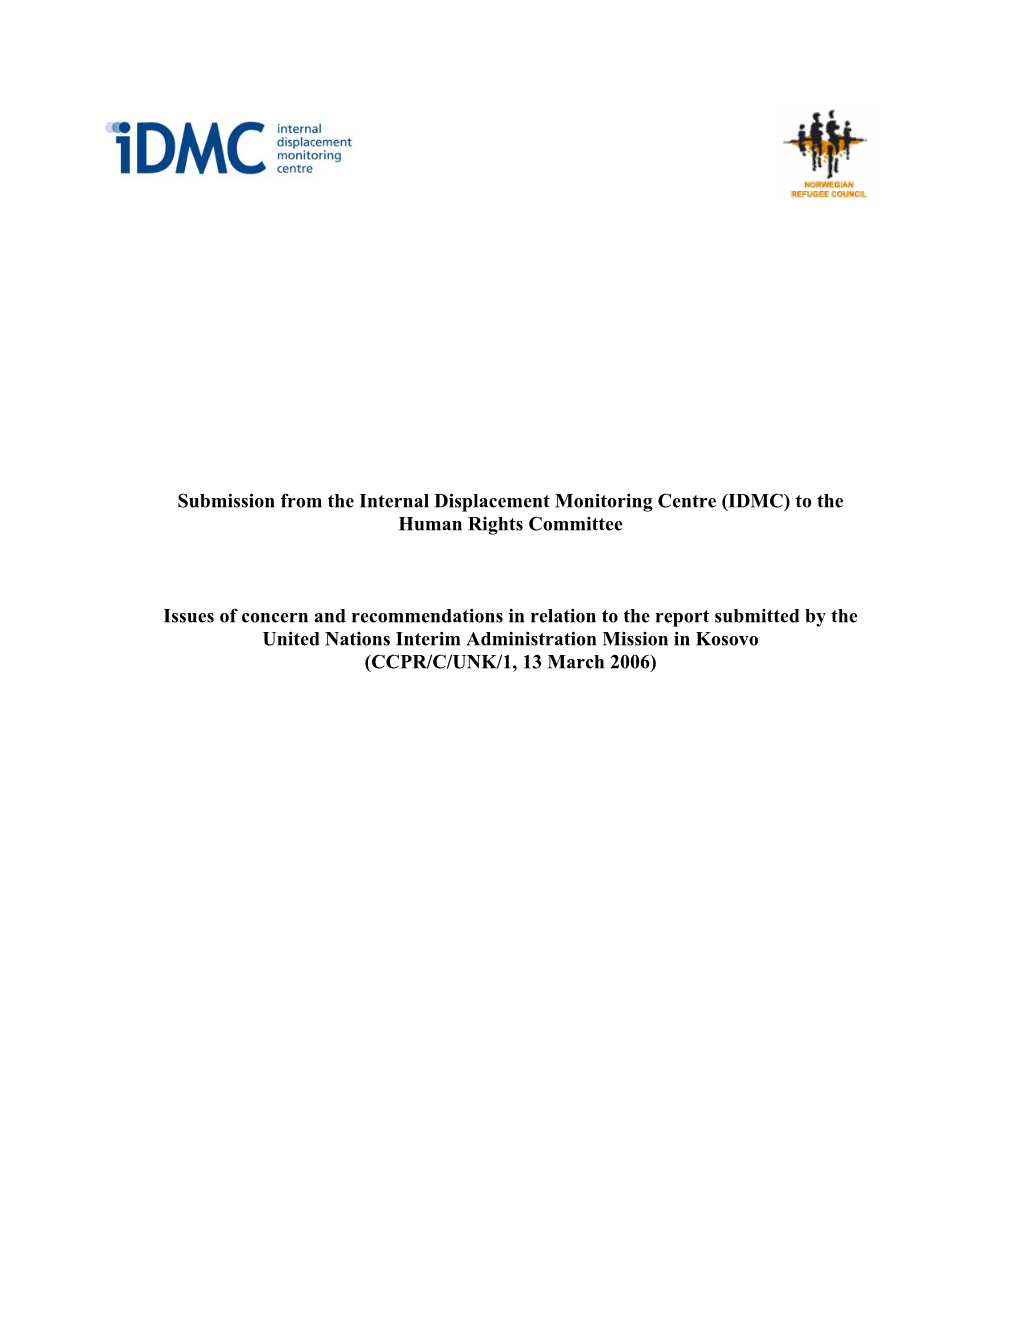 IDMC) to the Human Rights Committee